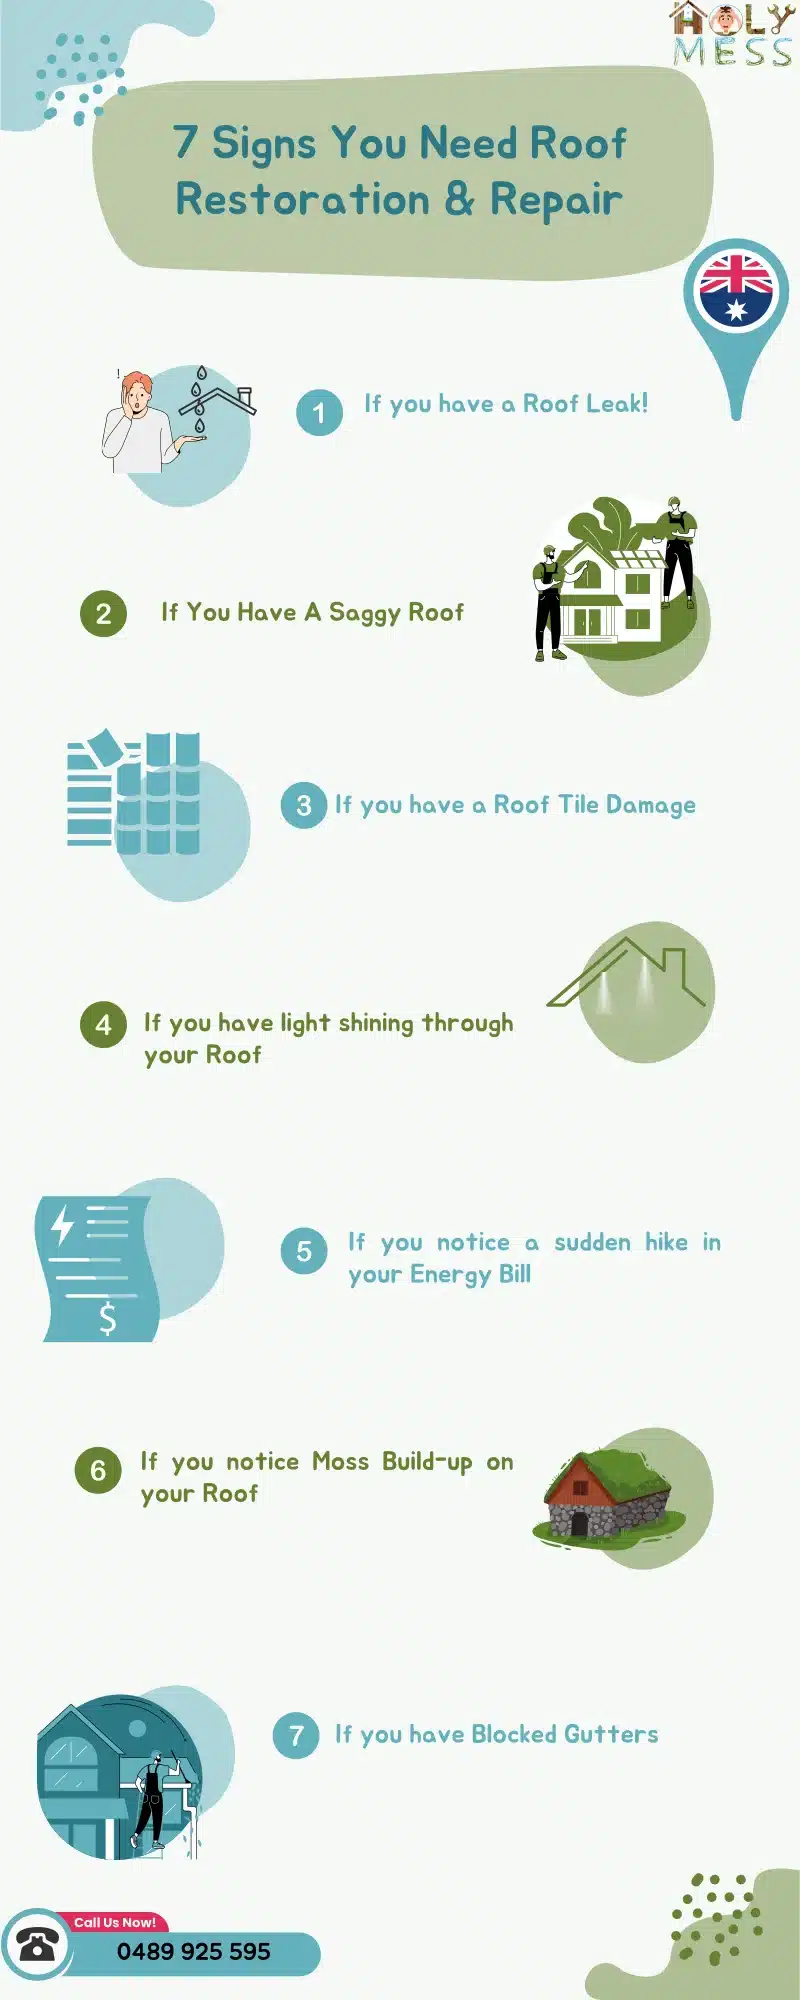 infographic showing 7 signs you need roof restoration